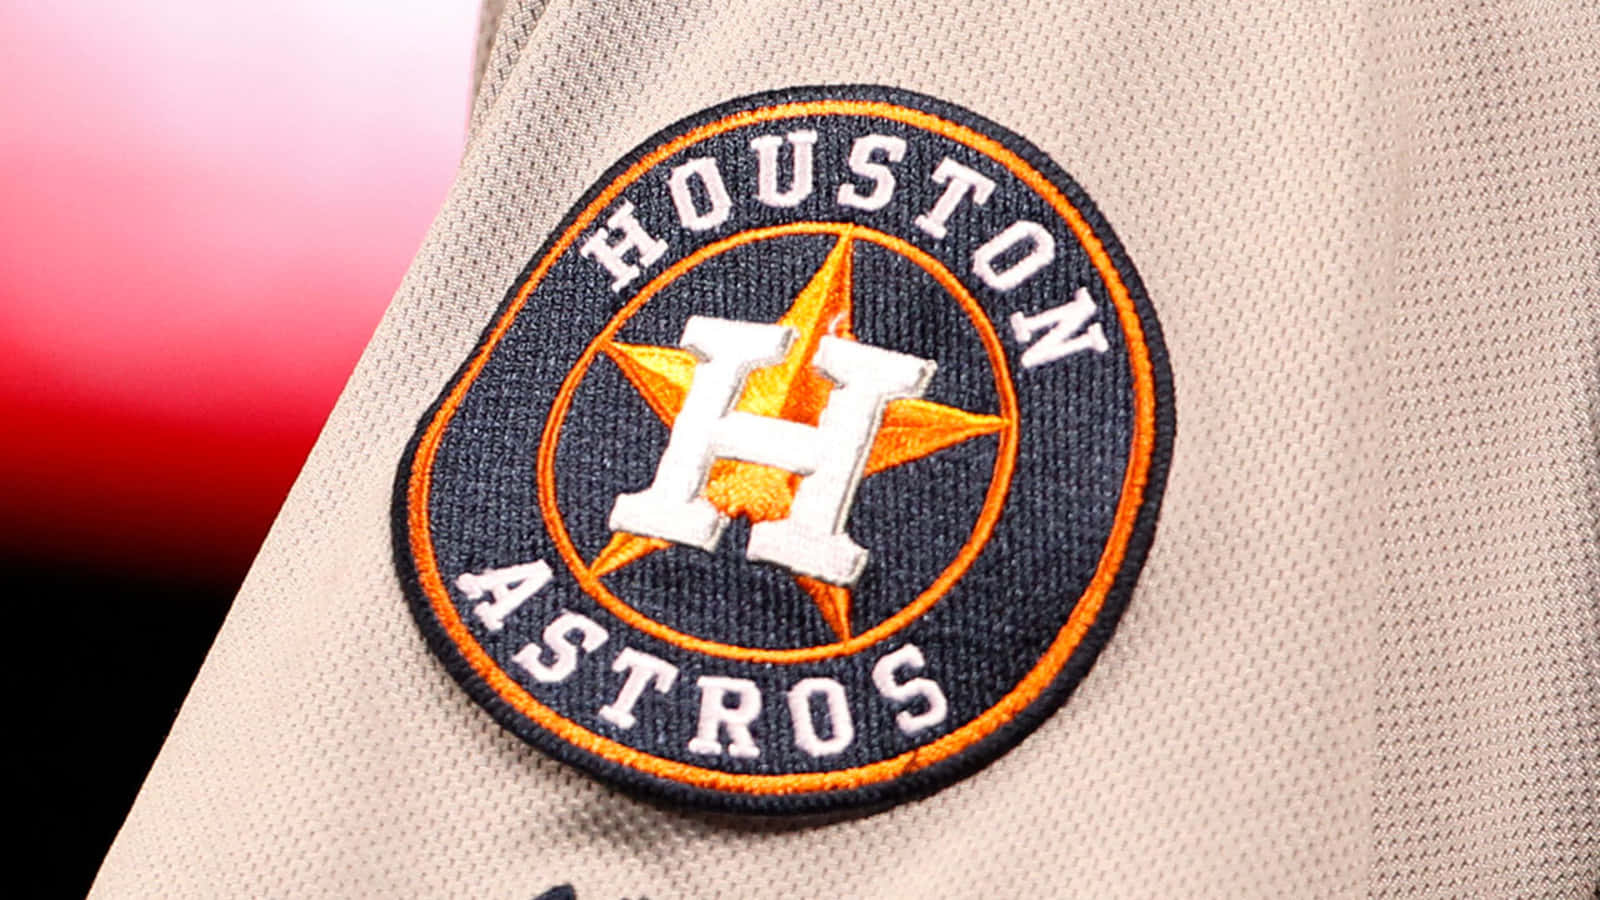 Astros flying high in the sky